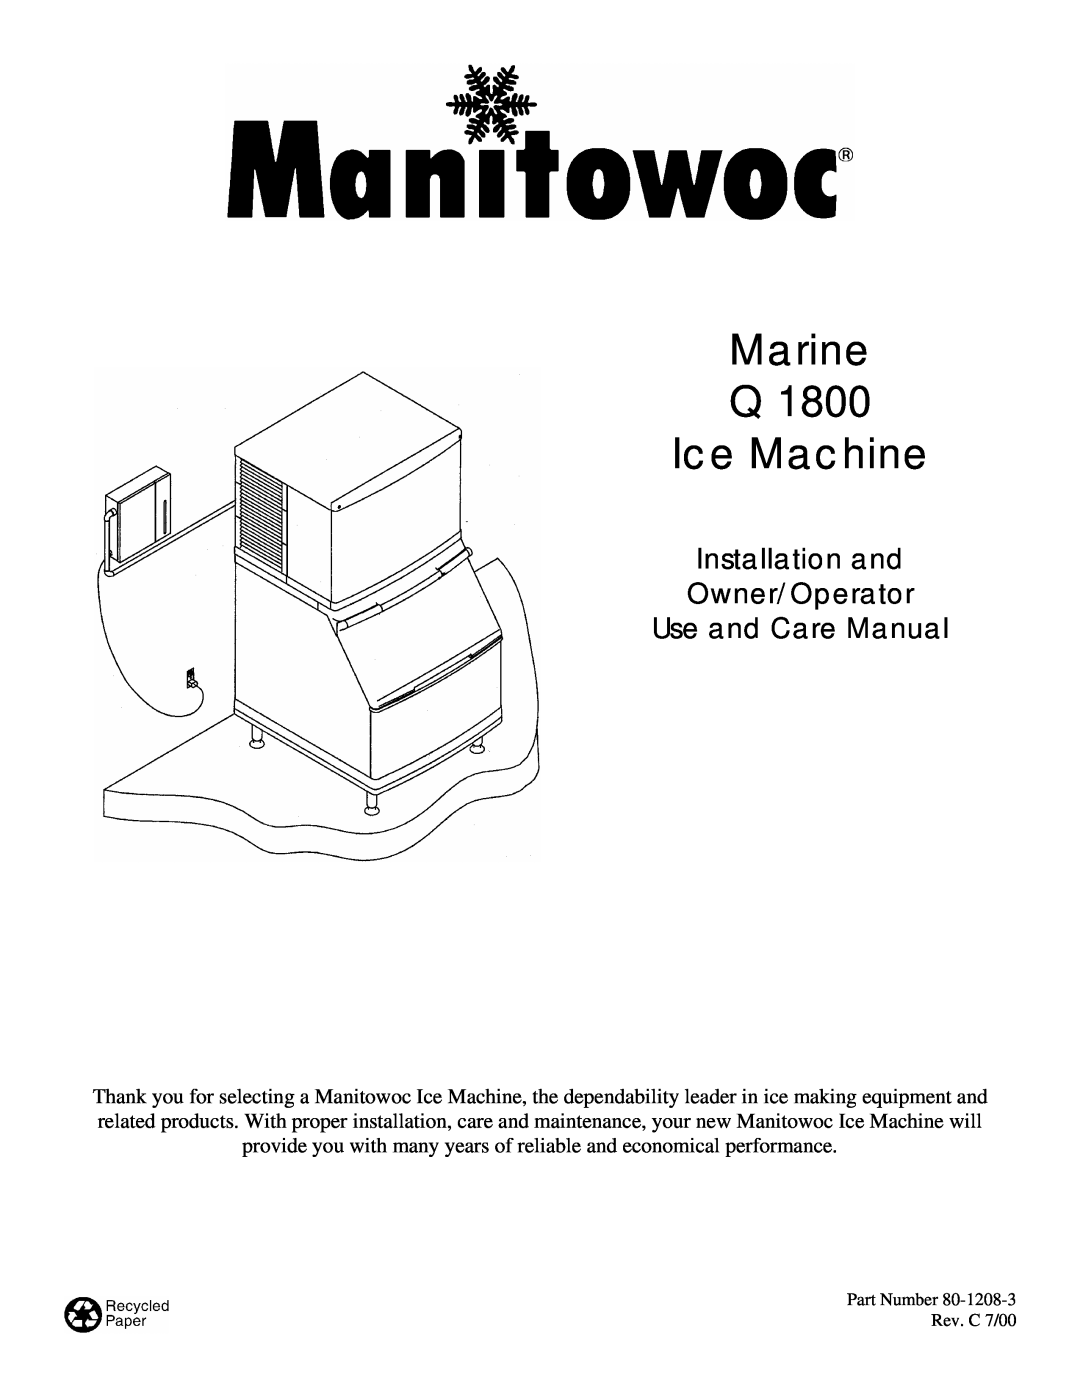 Manitowoc Ice Q 1800 manual Installation and Owner/Operator Use and Care Manual, Marine Q Ice Machine 